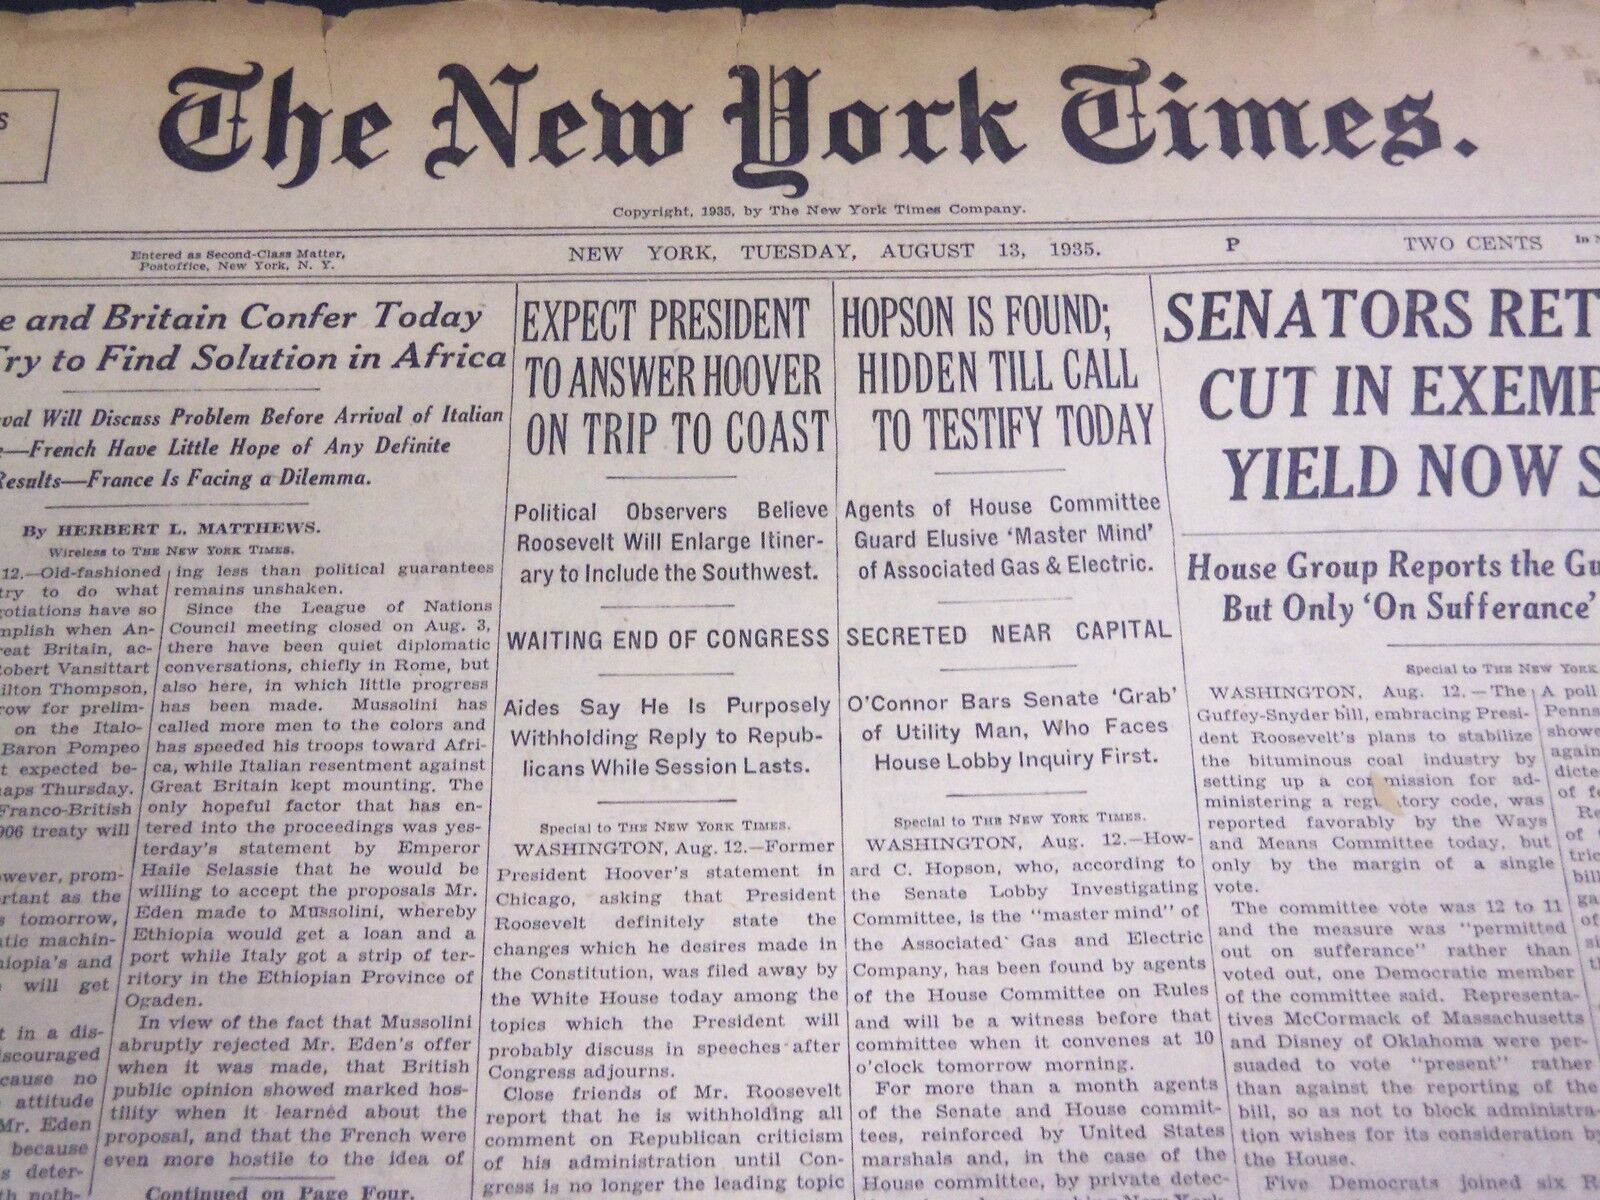 1935 AUGUST 13 NEW YORK TIMES - HOPSON IS FOUND, WILL TESTIFY TODAY - NT 4857